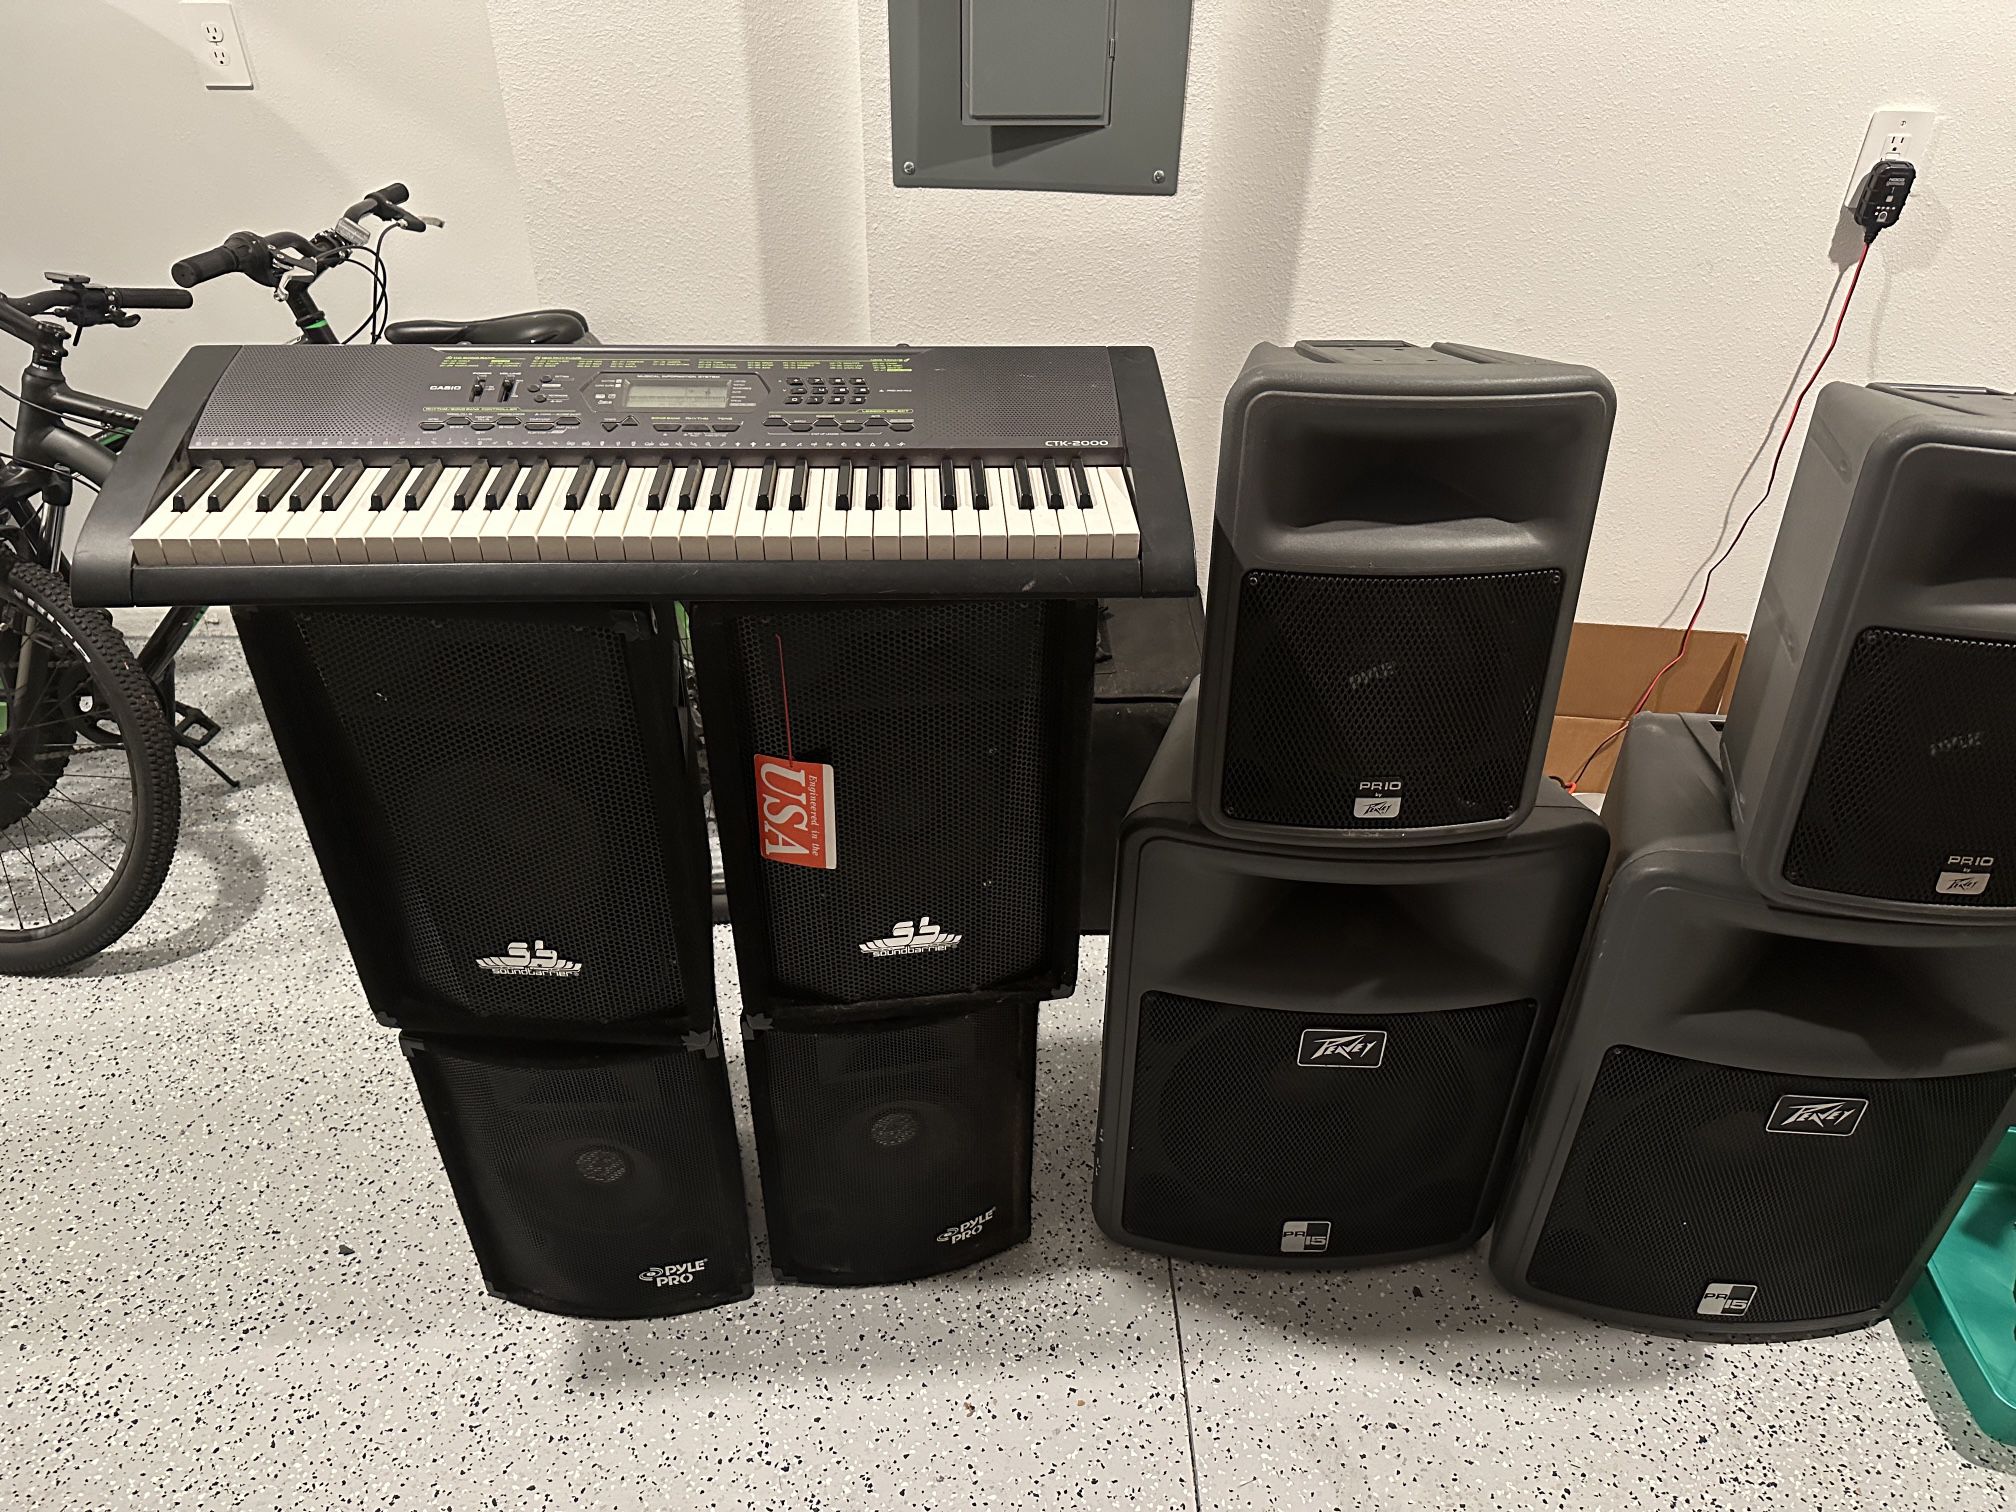 Speakers And Other DJ equipment